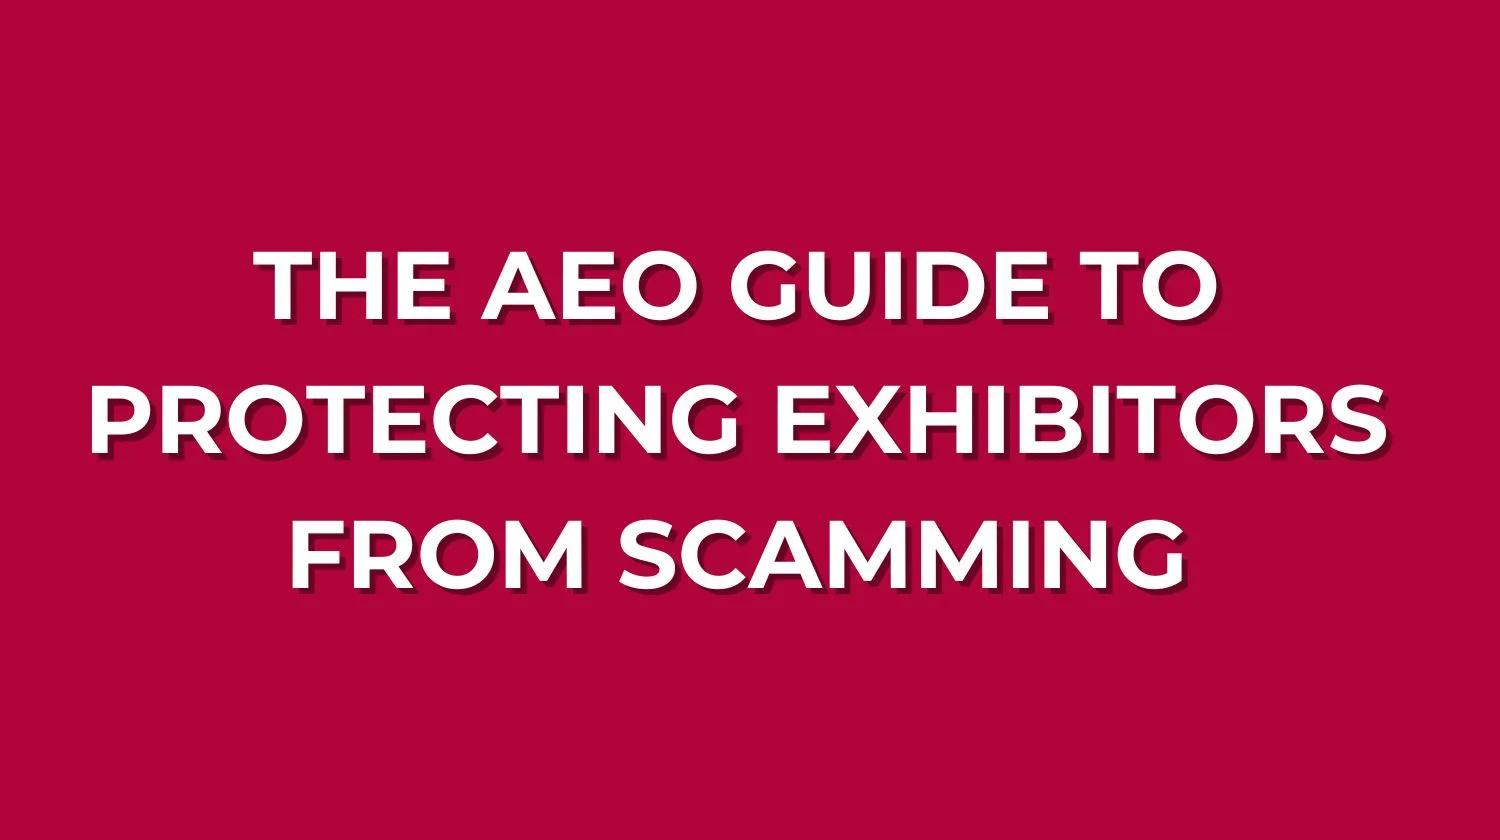 SAFEGUARD EXHIBITORS WITH ESSENTIAL TIPS FROM AEO'S GUIDE